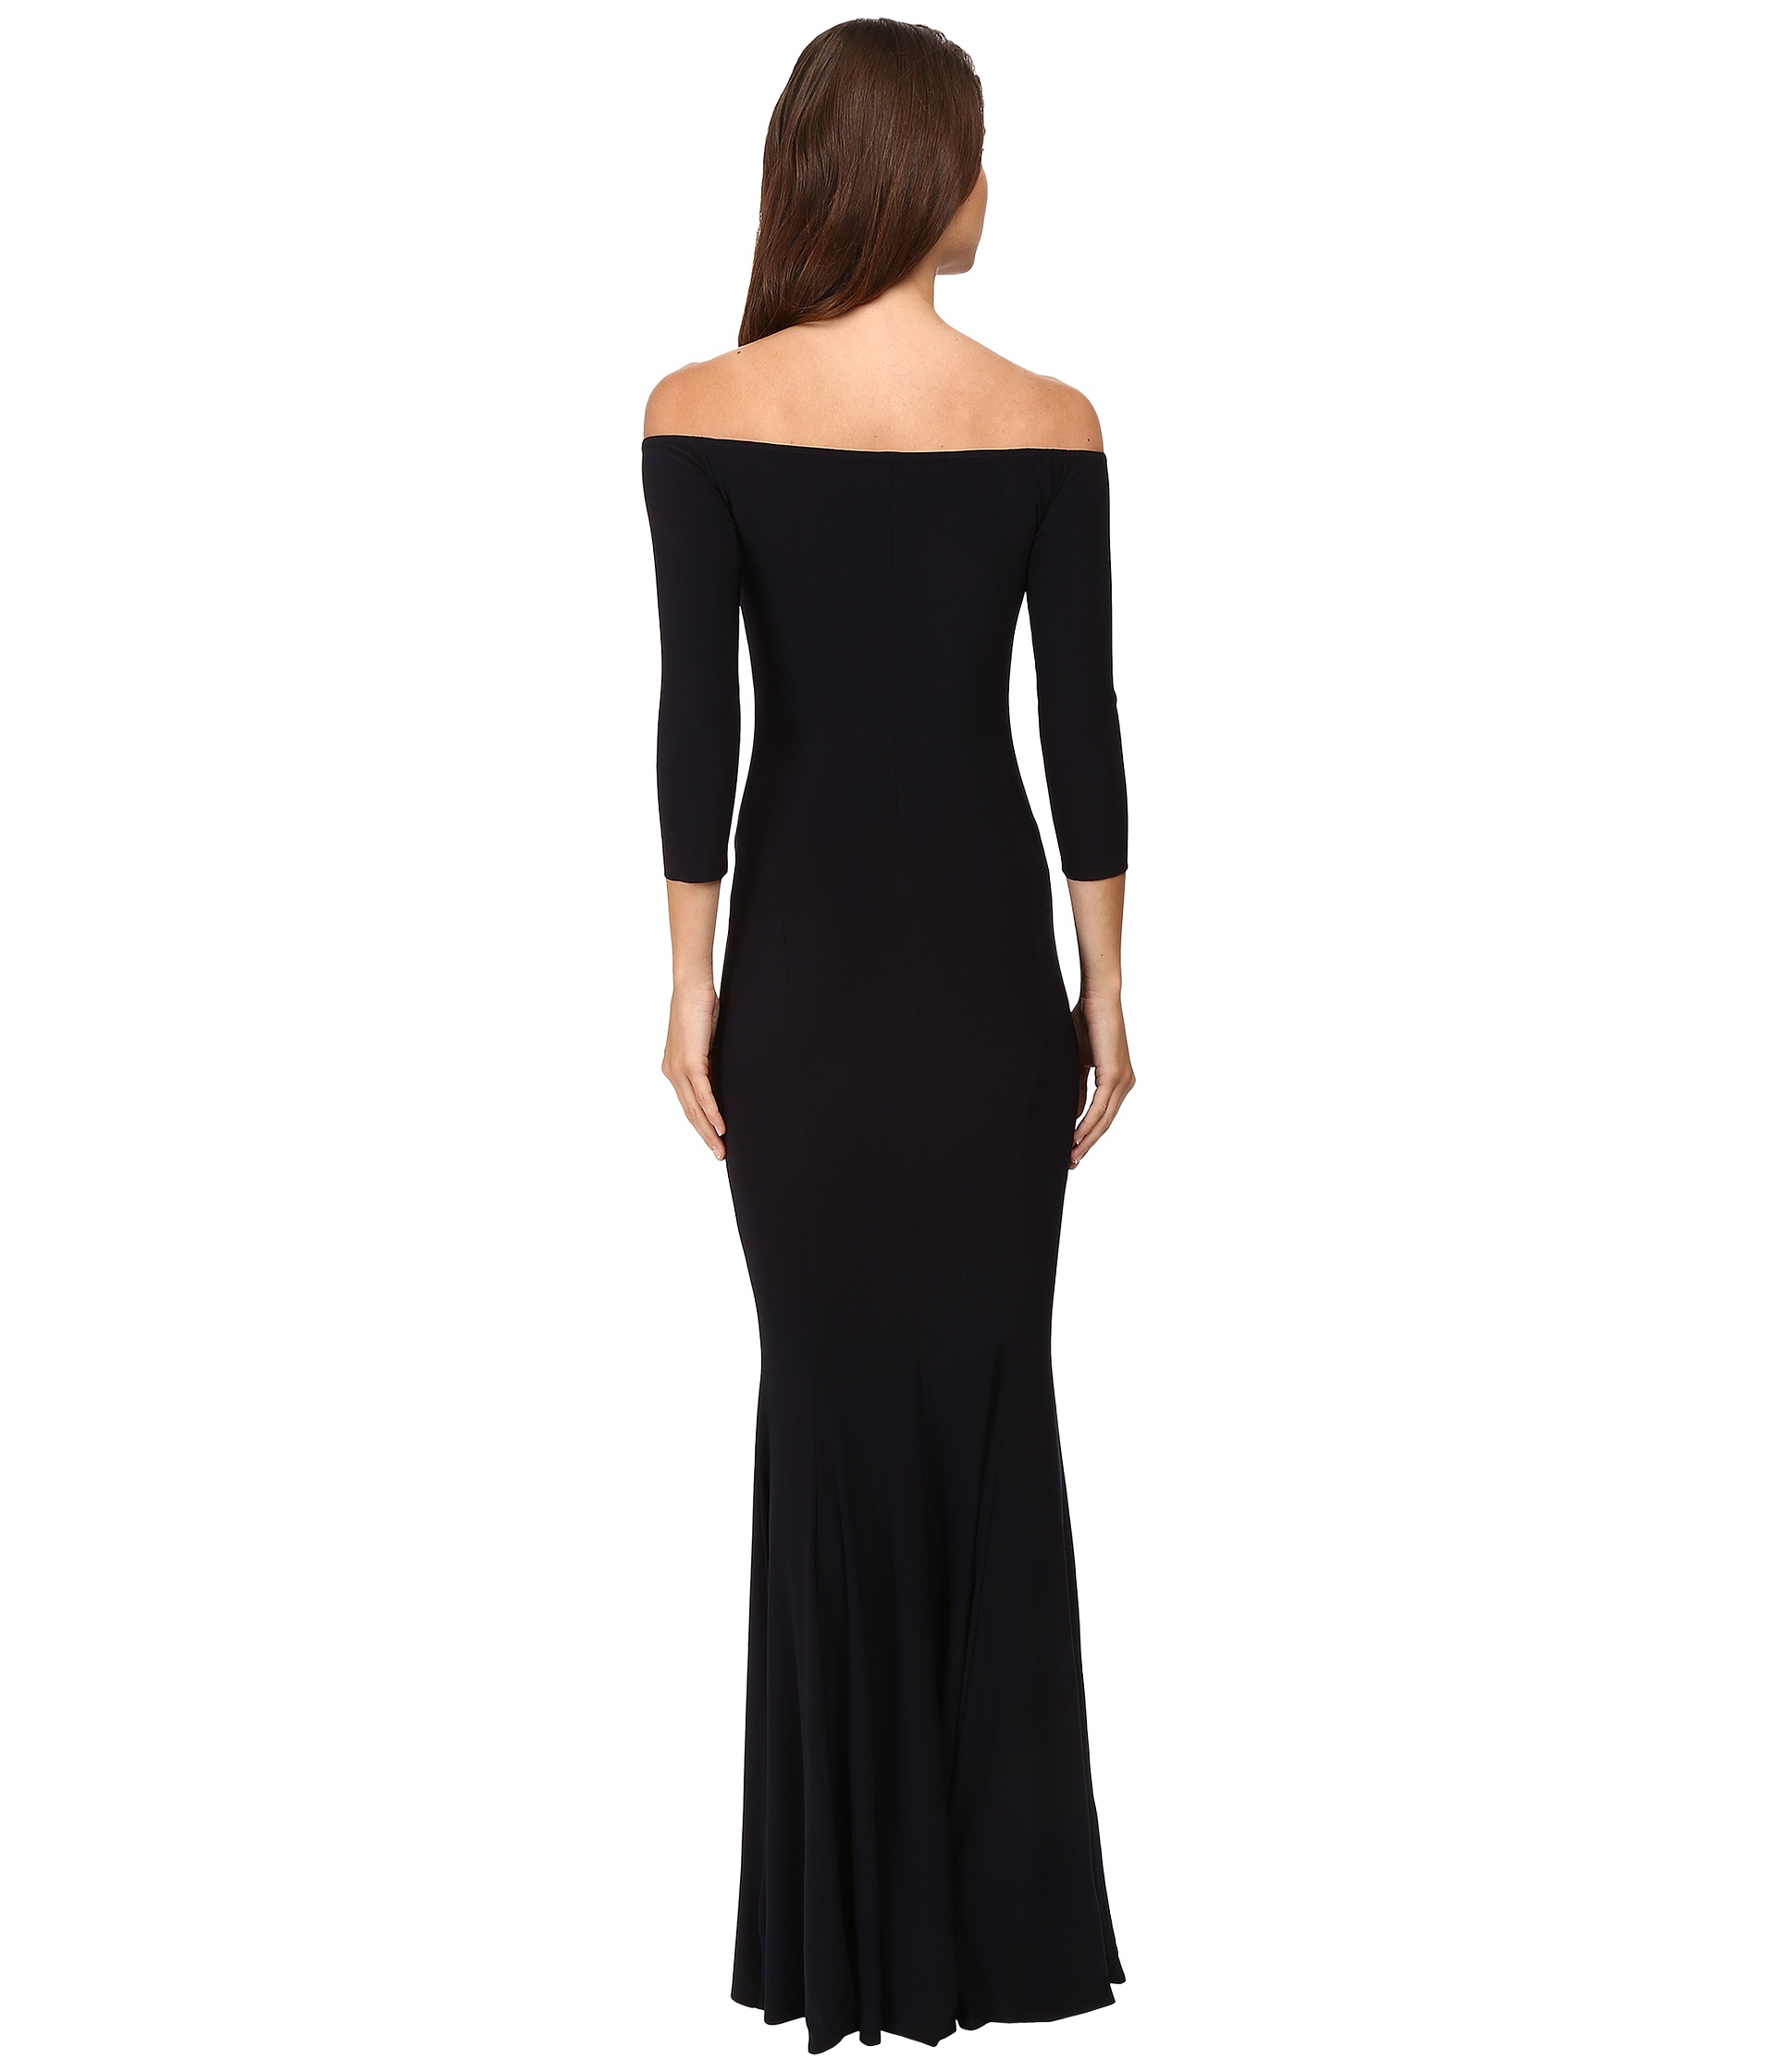 KAMALIKULTURE by Norma Kamali Off Shoulder Fishtail Gown at Zappos.com